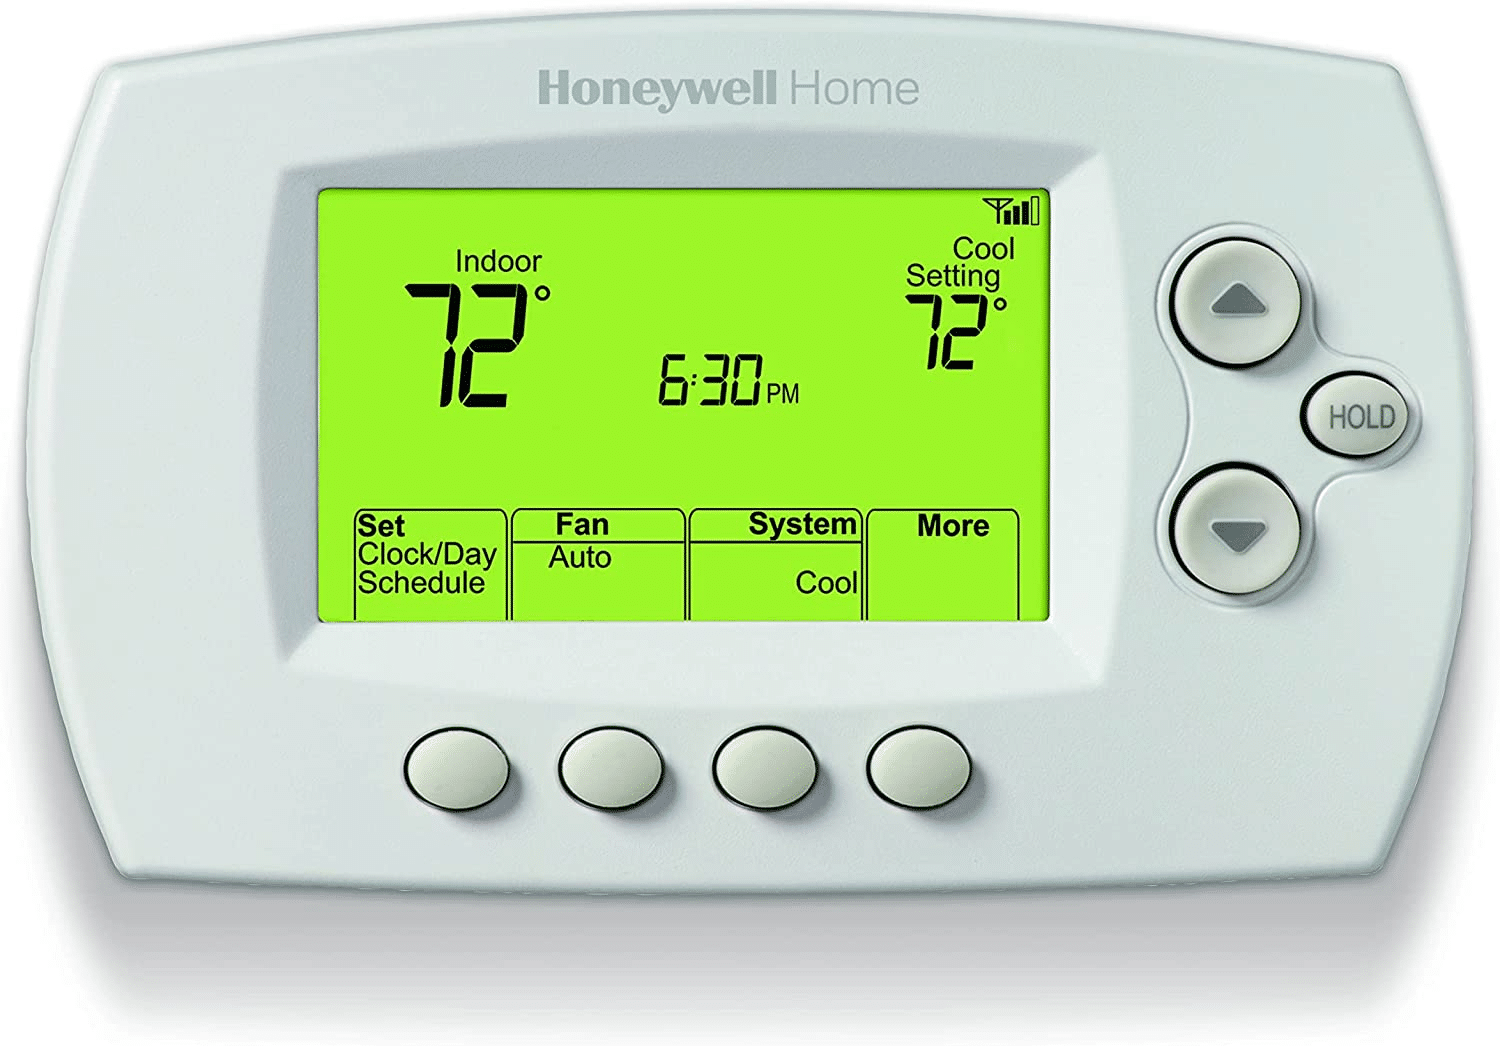 HVAC Issues? Resetting Your Digital Thermostat May Help